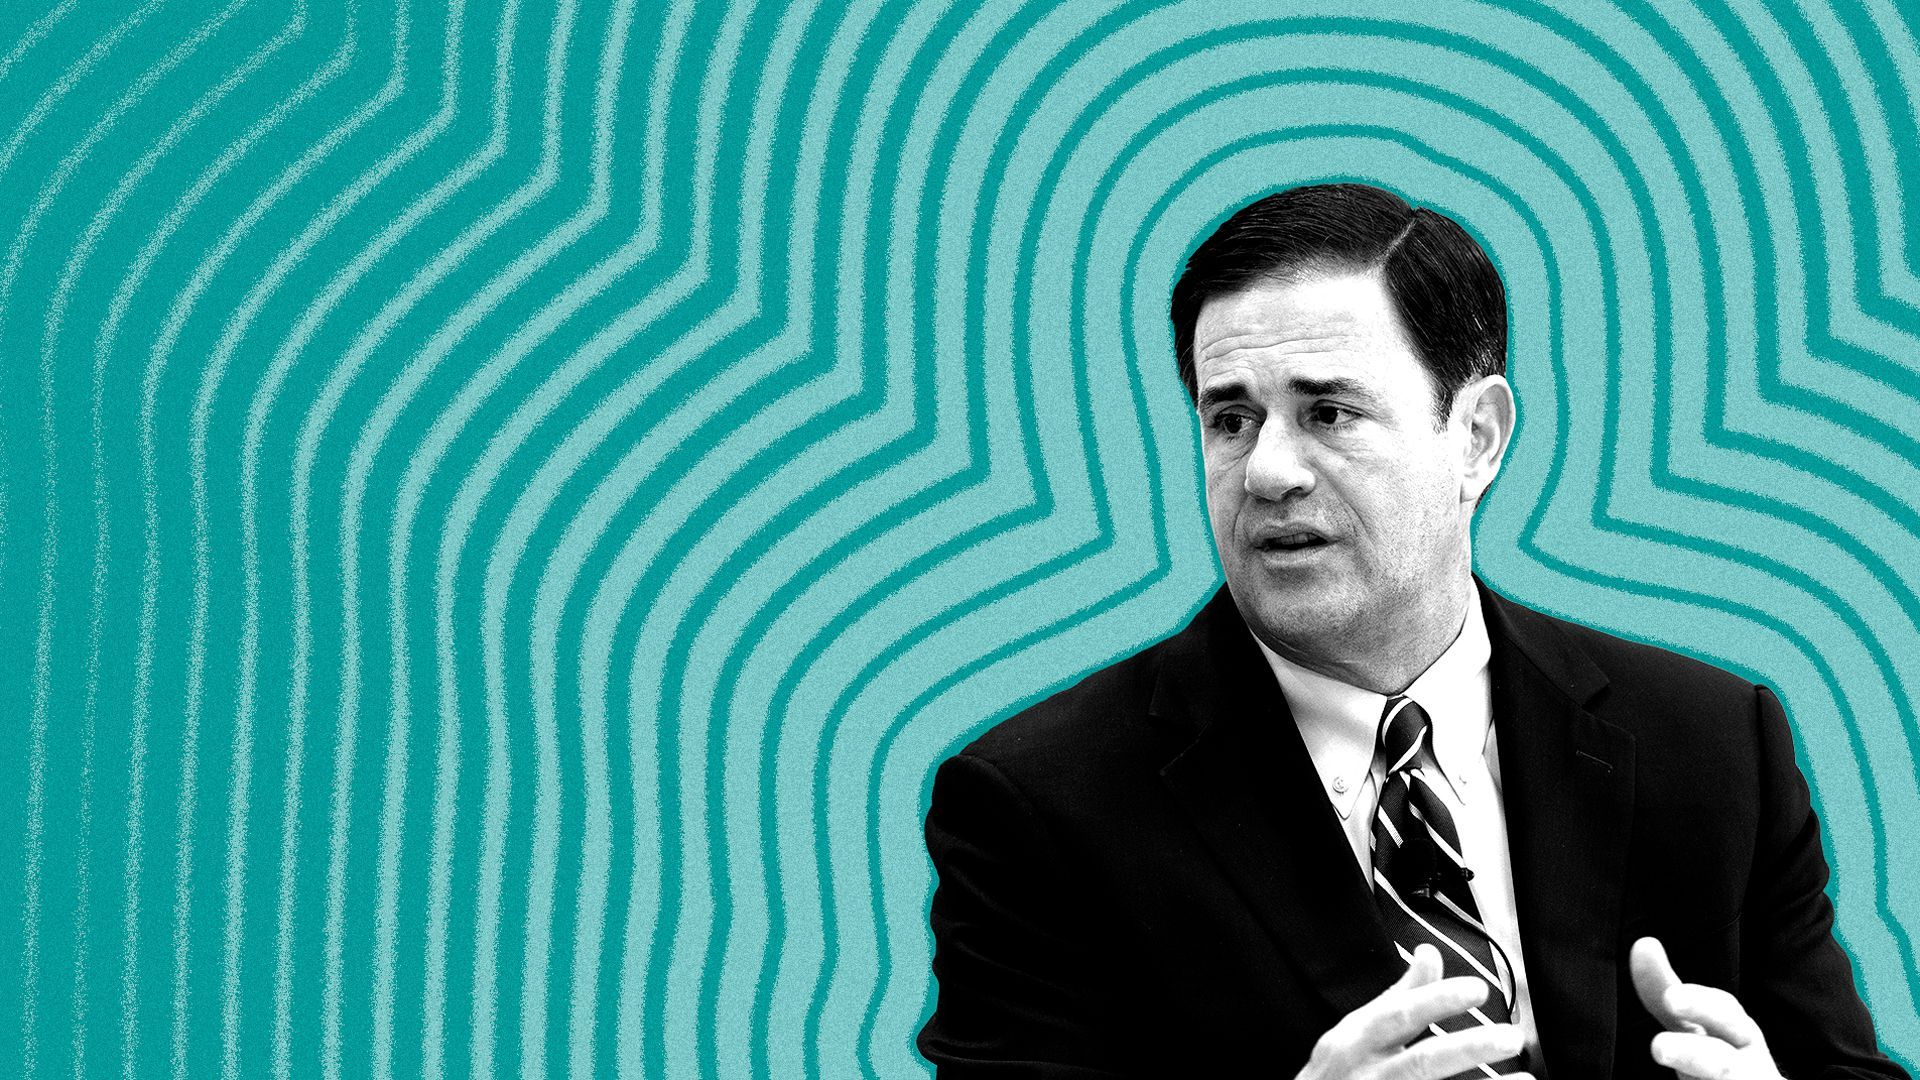 Photo illustration of Arizona Governor Doug Ducey with lines radiating from him.